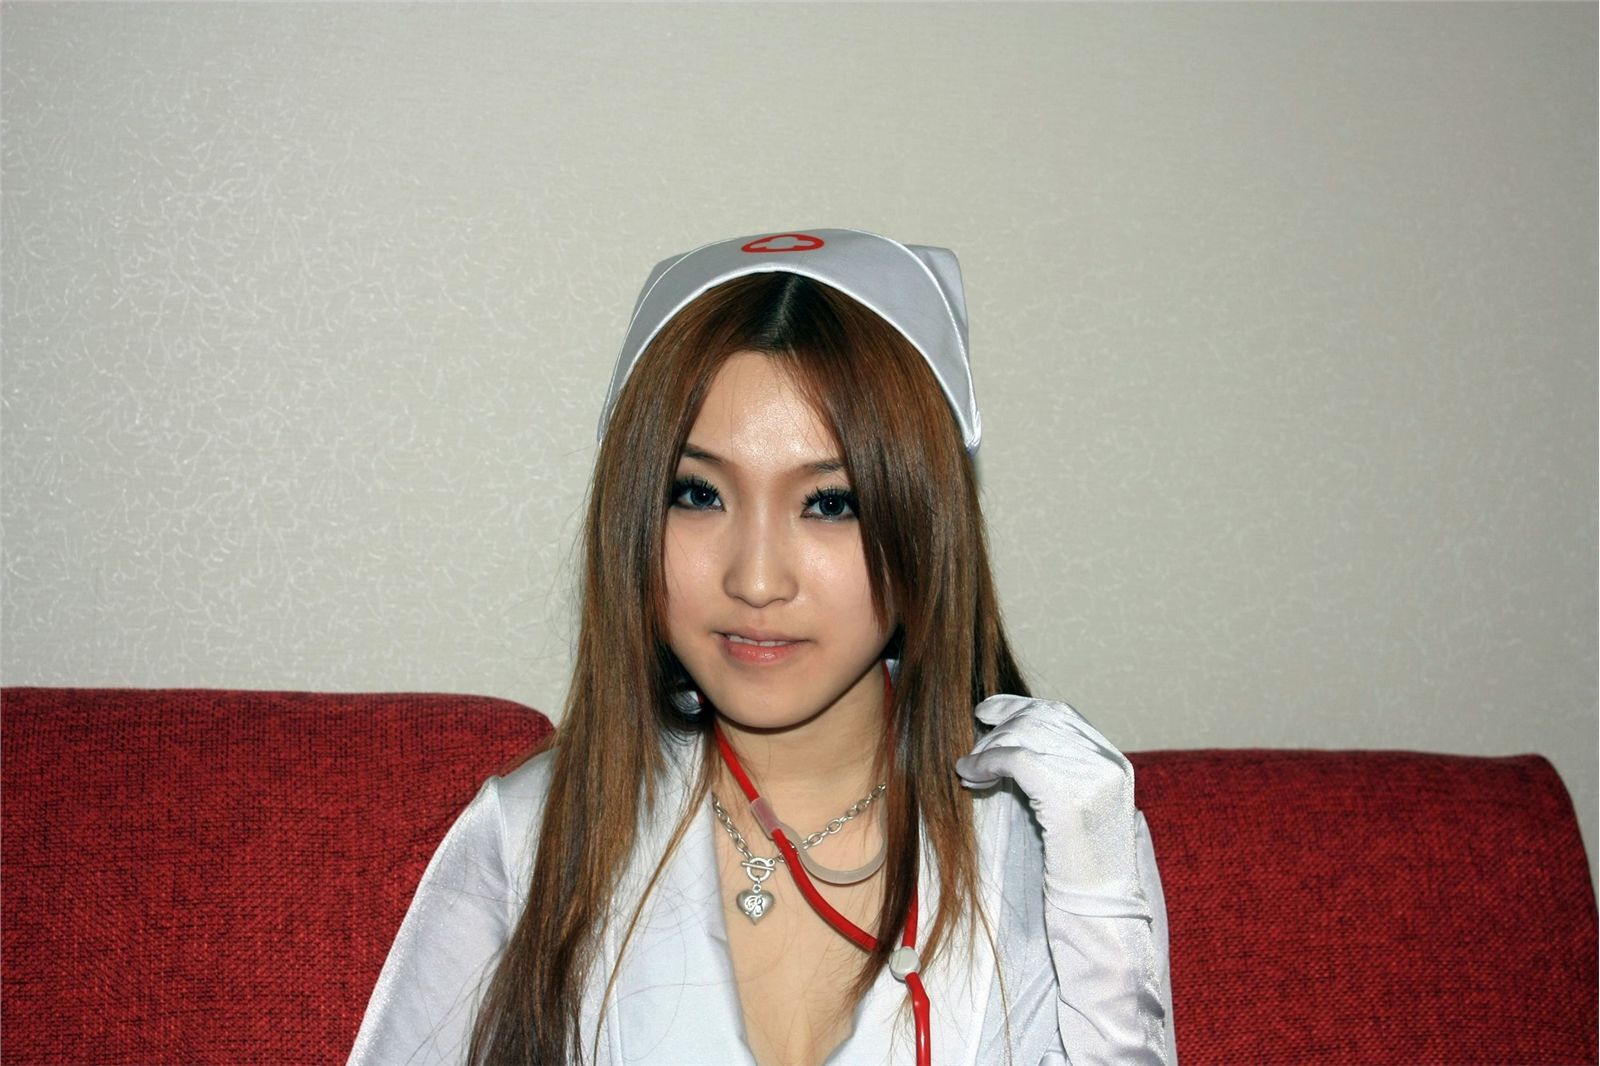 [online collection] Super sexy nurse sister on July 31, 2013